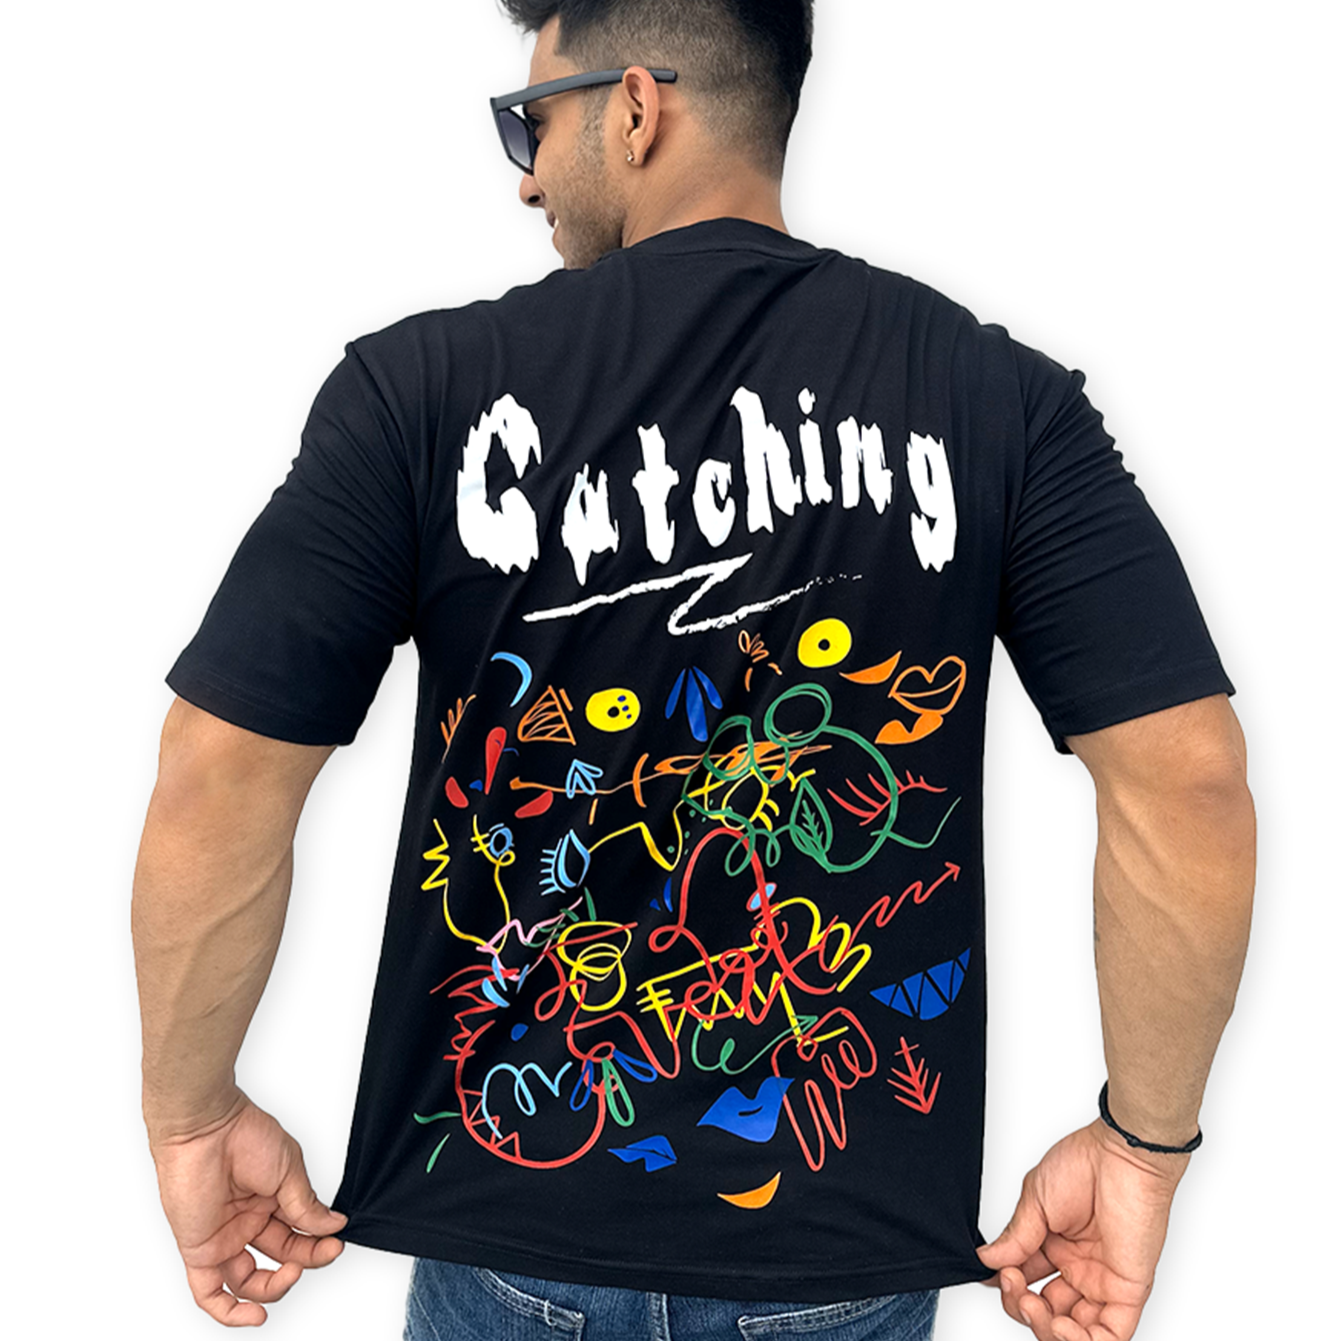 Line Cutterz - Catch of the Day T-Shirt